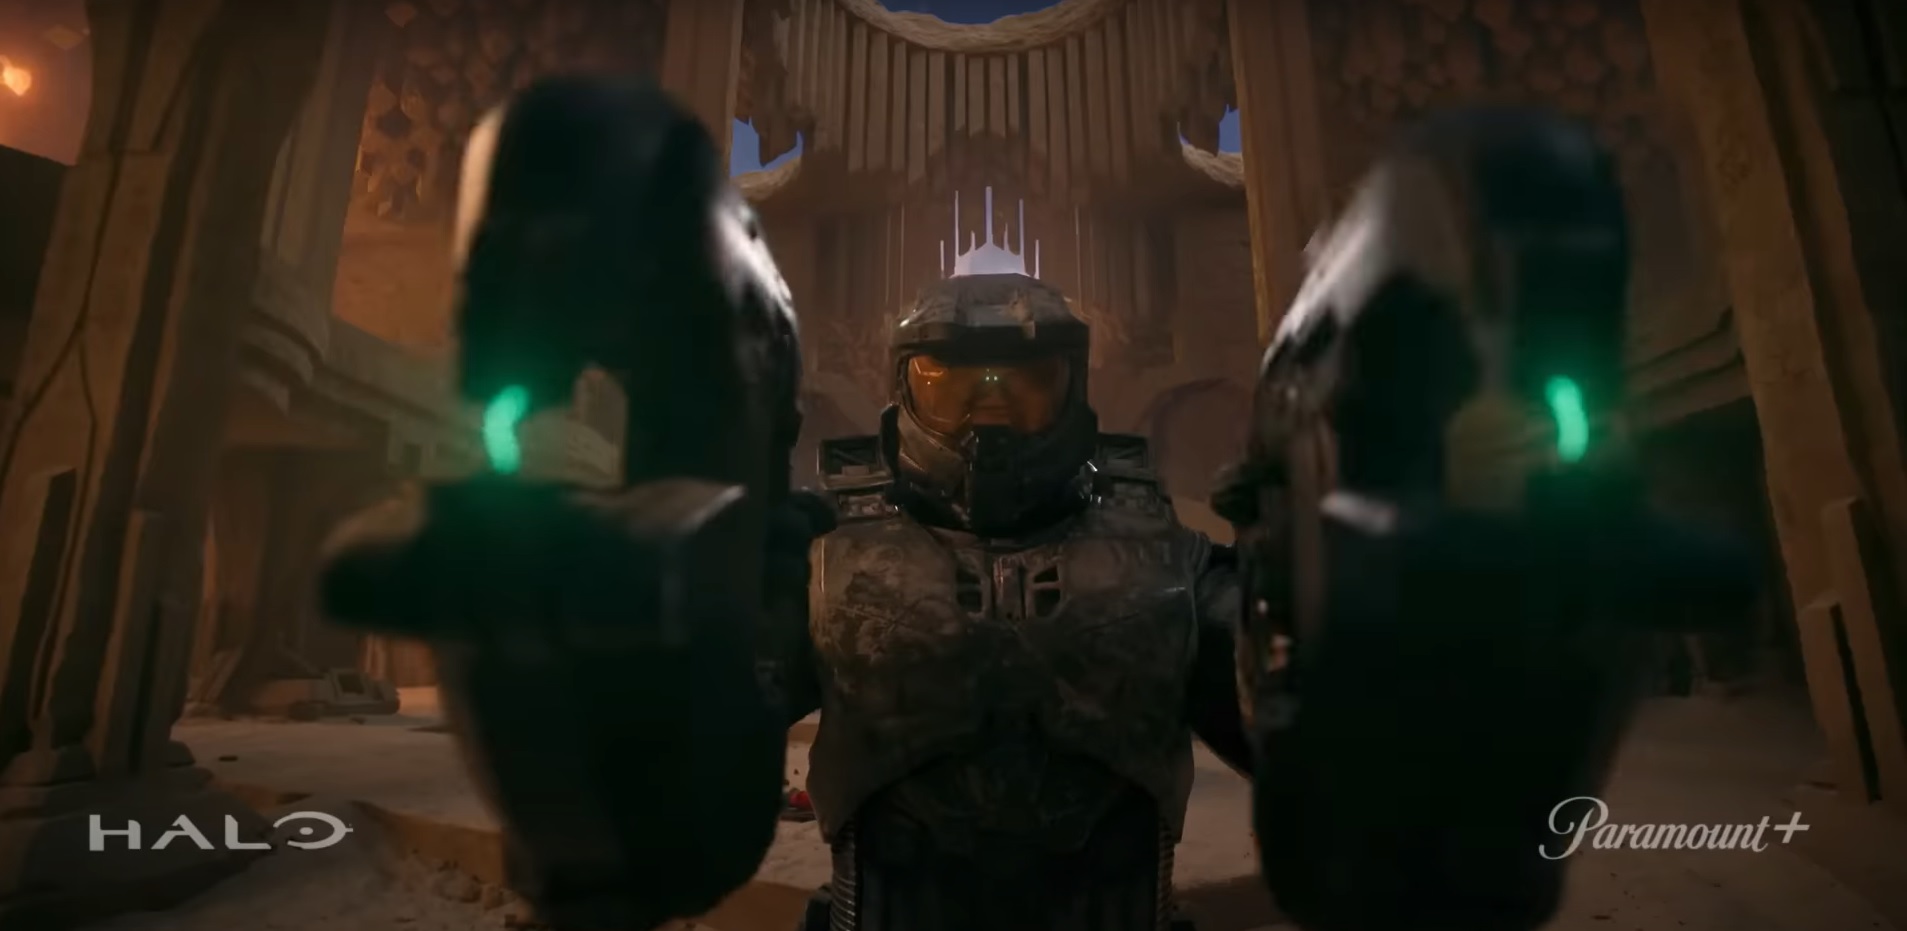 Halo: the first season of the Paramount+ series ended. What did the last chapter leave us?